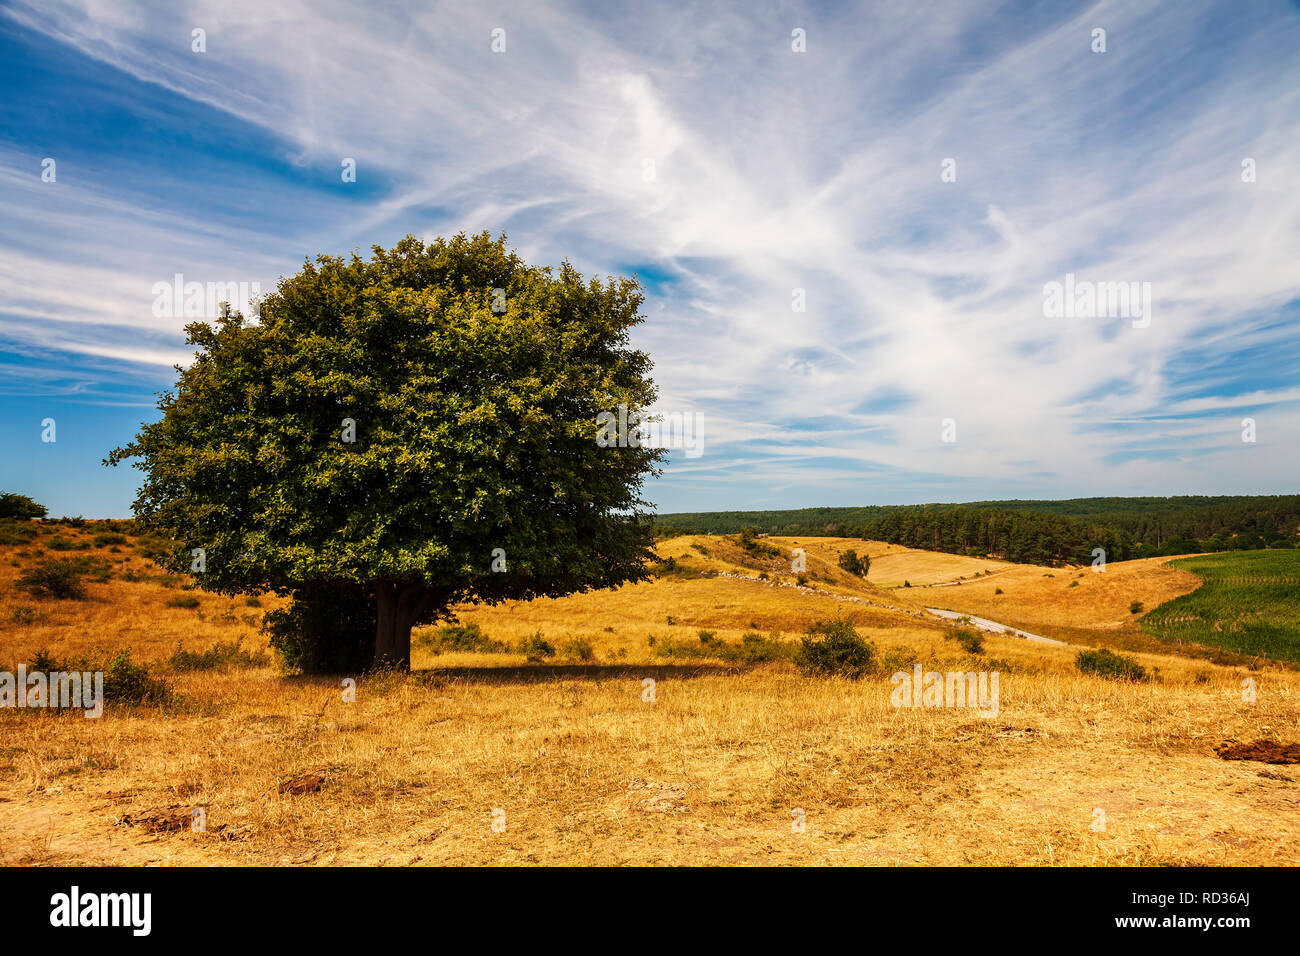 Lone tree in hilly rural landscape. Brosarp, south Sweden. Stock Photo